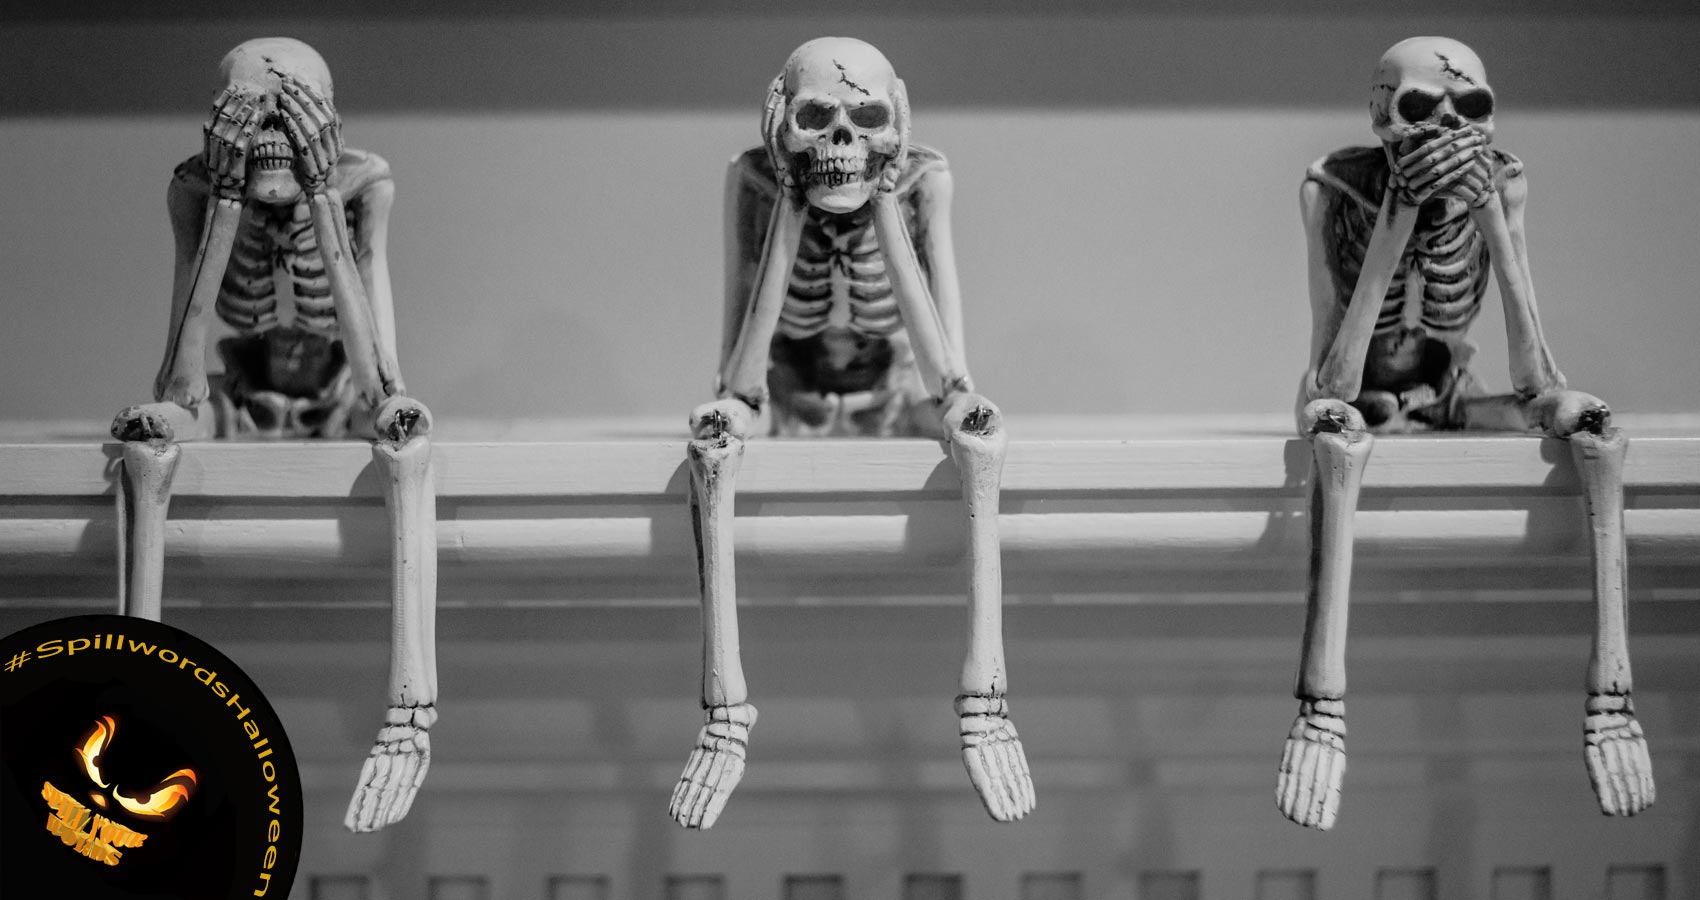 The Skeletons May Just Kill Them, poetry by Linda M. Crate at Spillwords.com